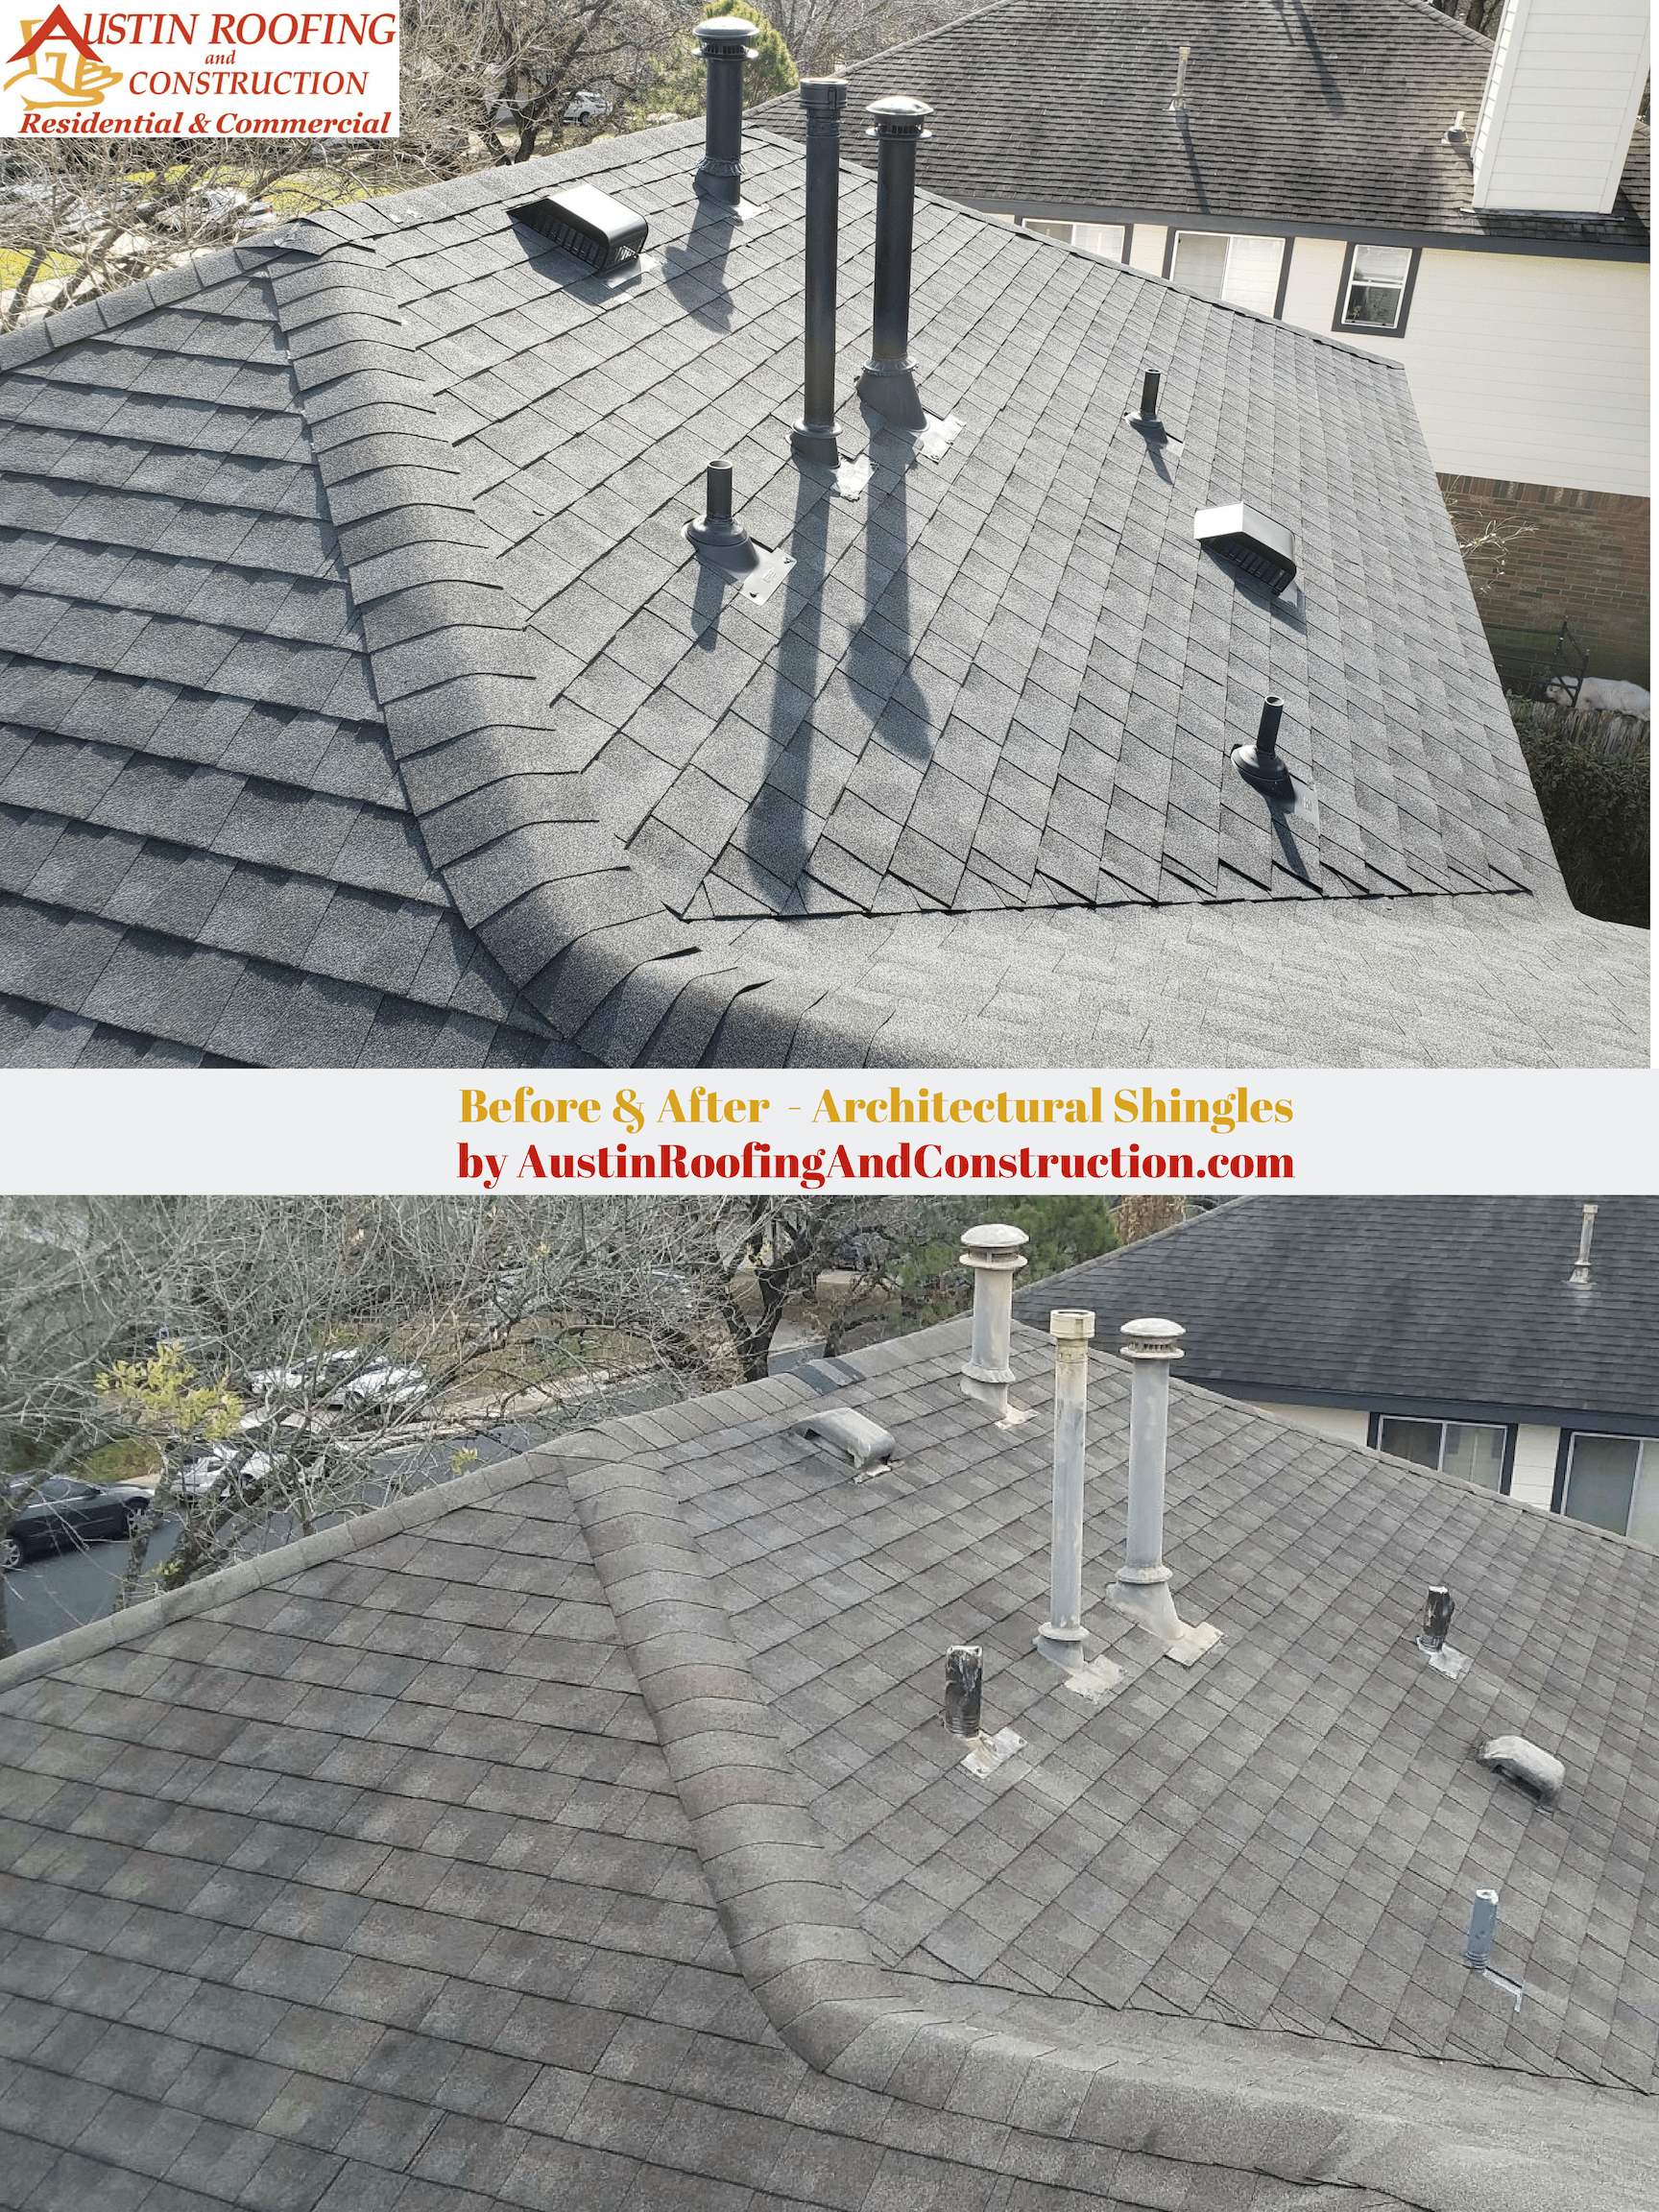 Before & After Architectural Shingles by Austin Roofing and Construction